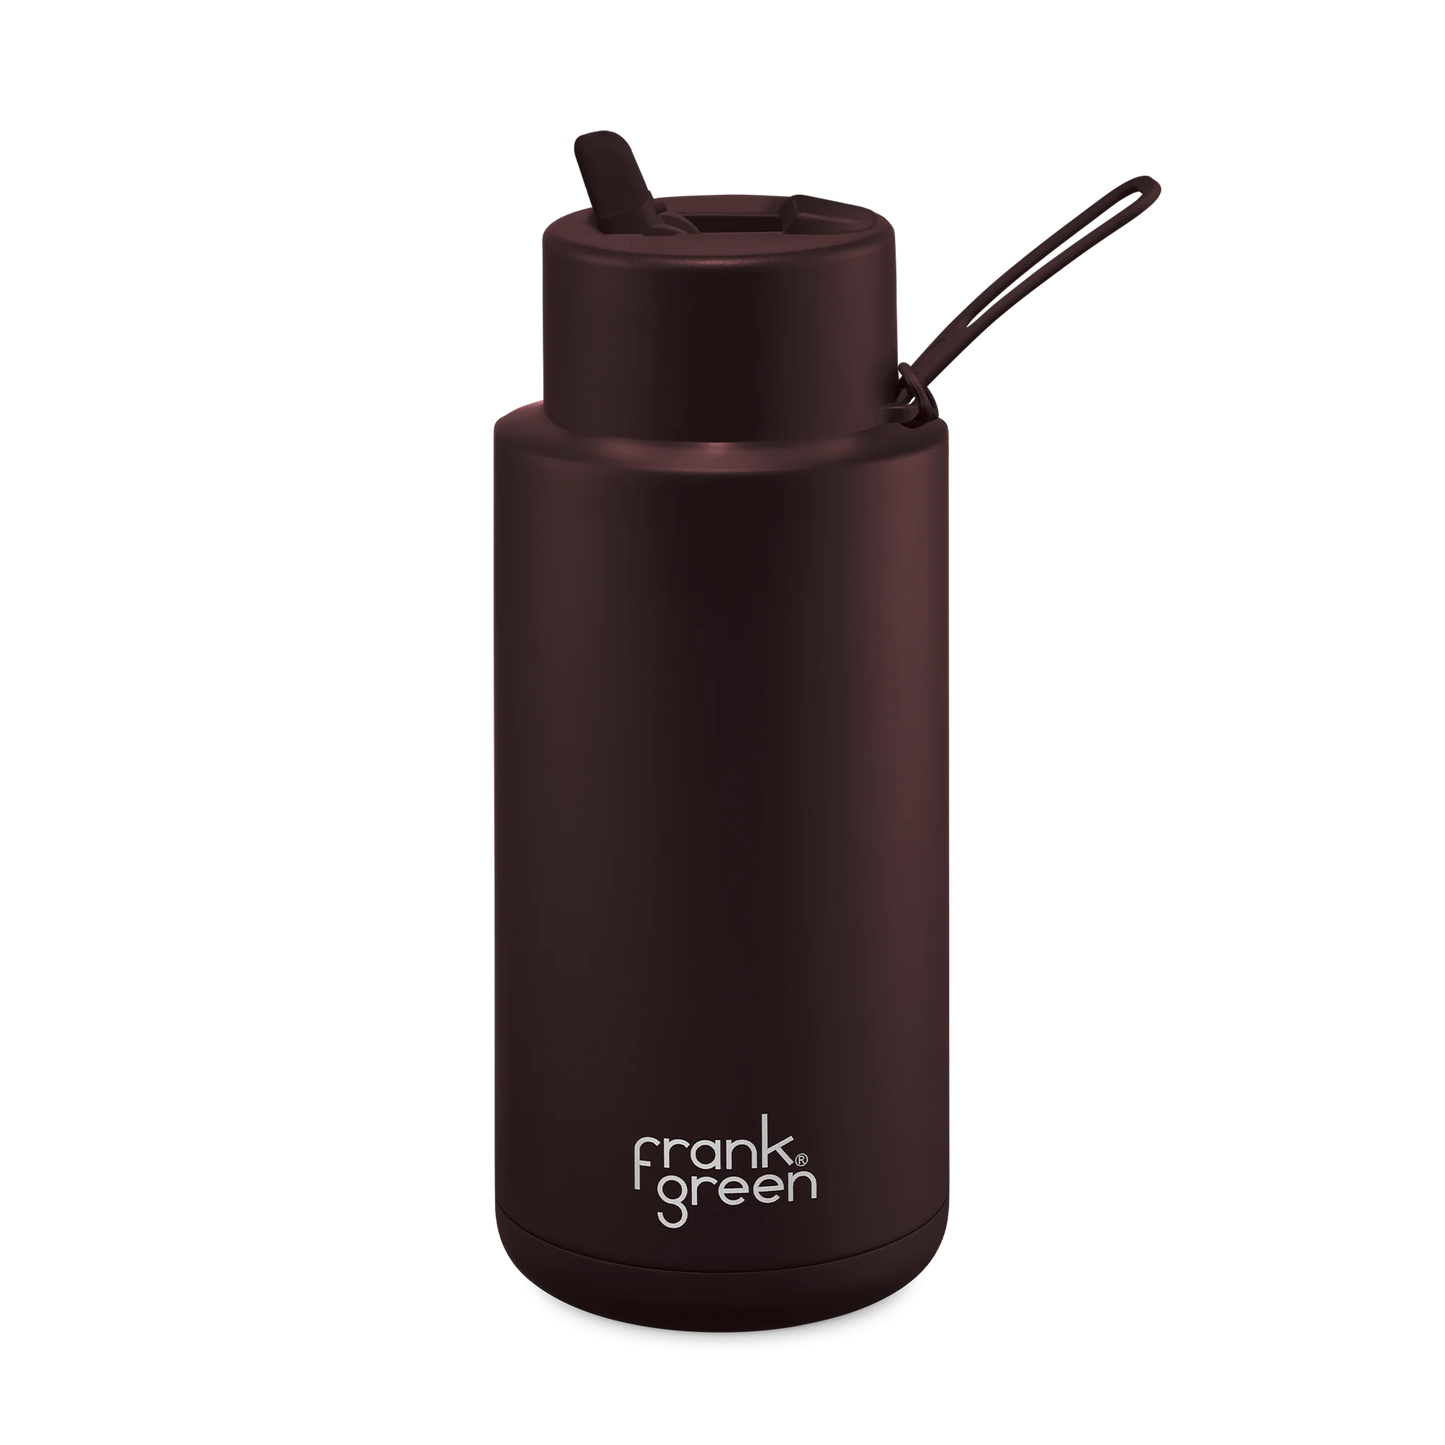 1L Chocolate Ceramic Reusable Bottle - Limited Edition